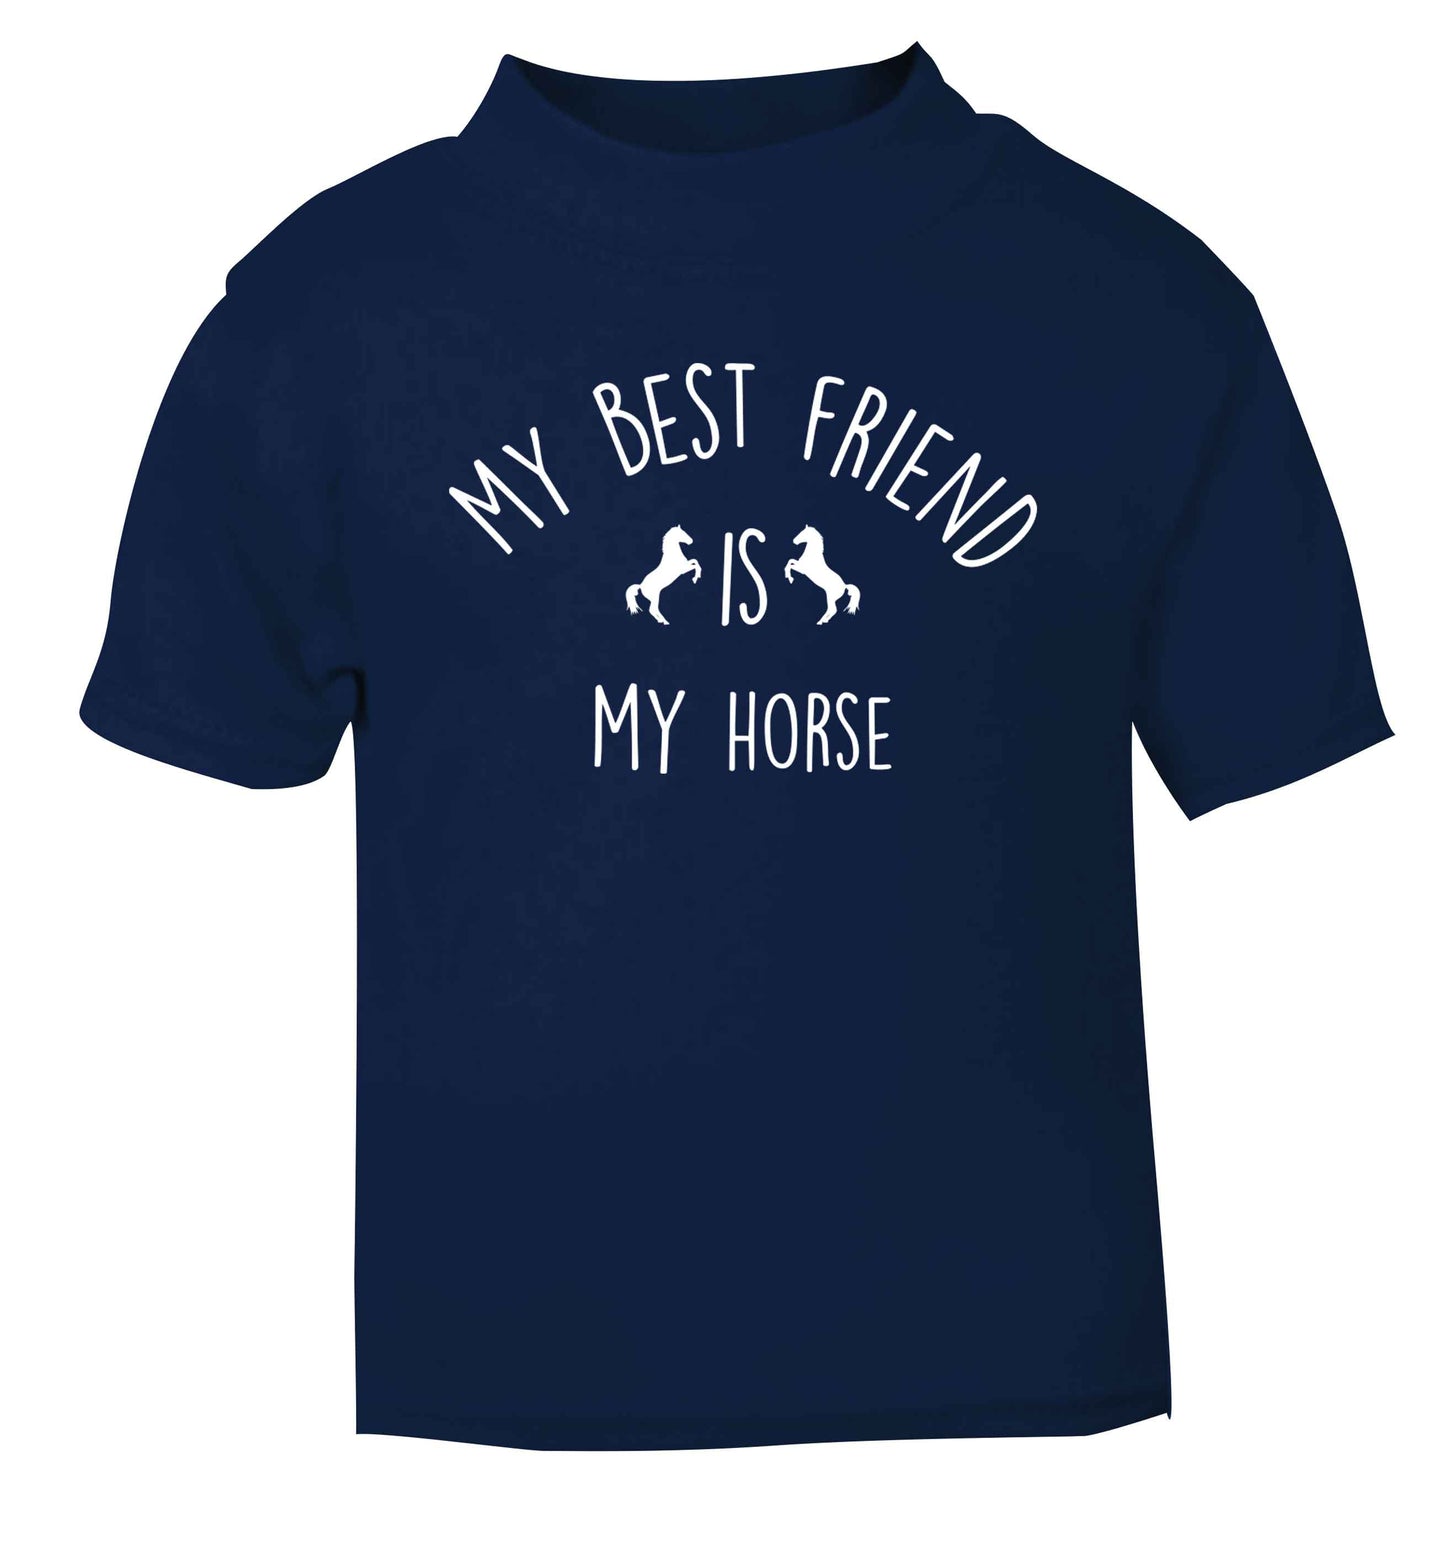 My best friend is my horse navy baby toddler Tshirt 2 Years